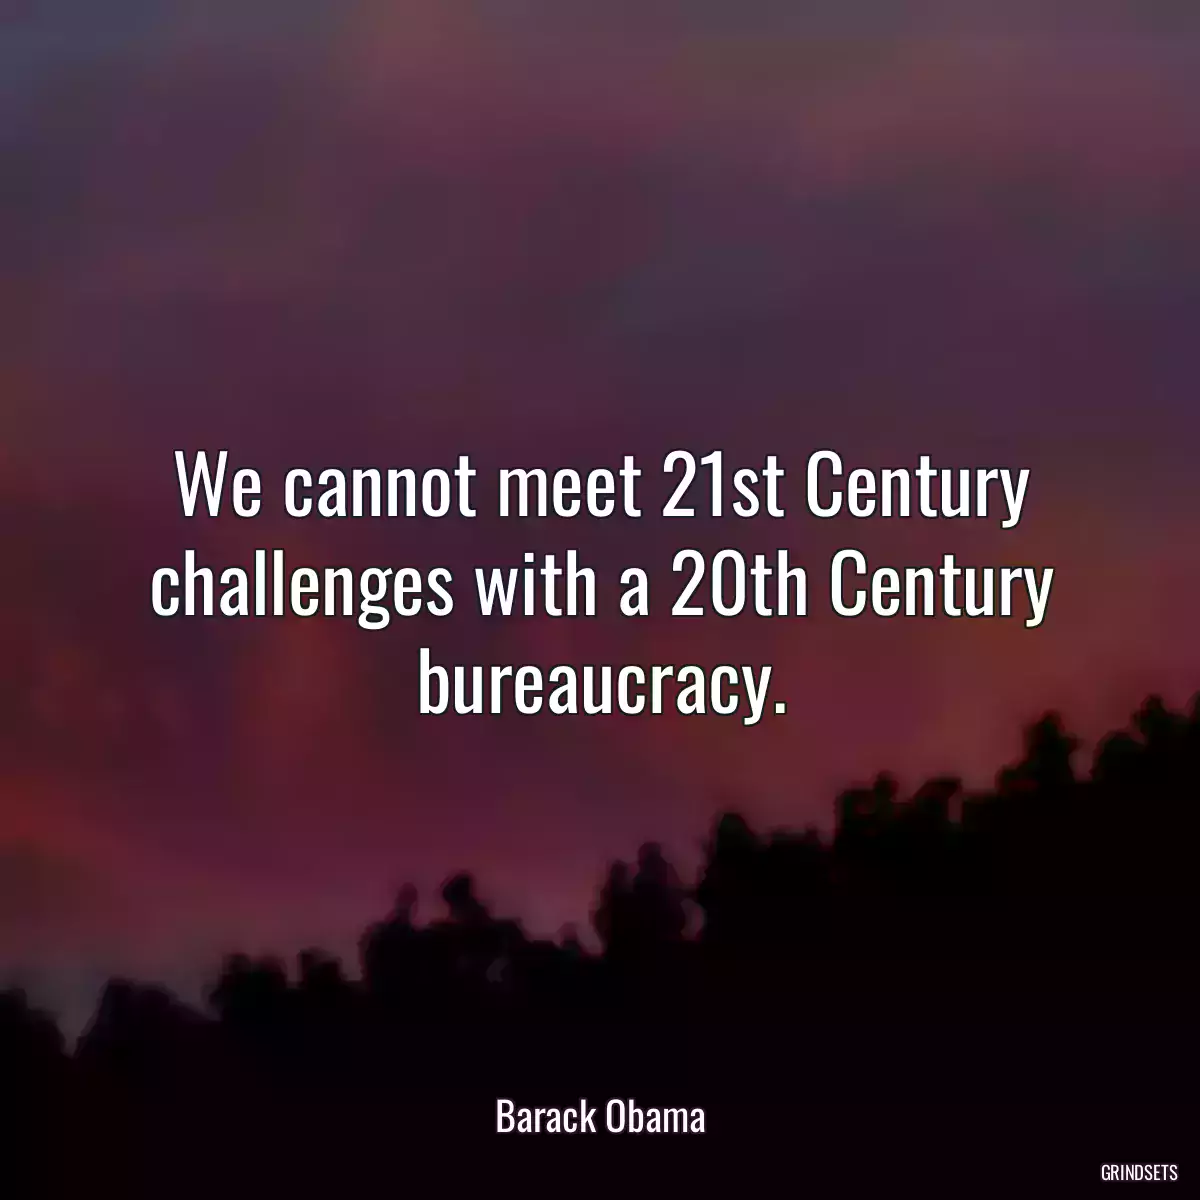 We cannot meet 21st Century challenges with a 20th Century bureaucracy.